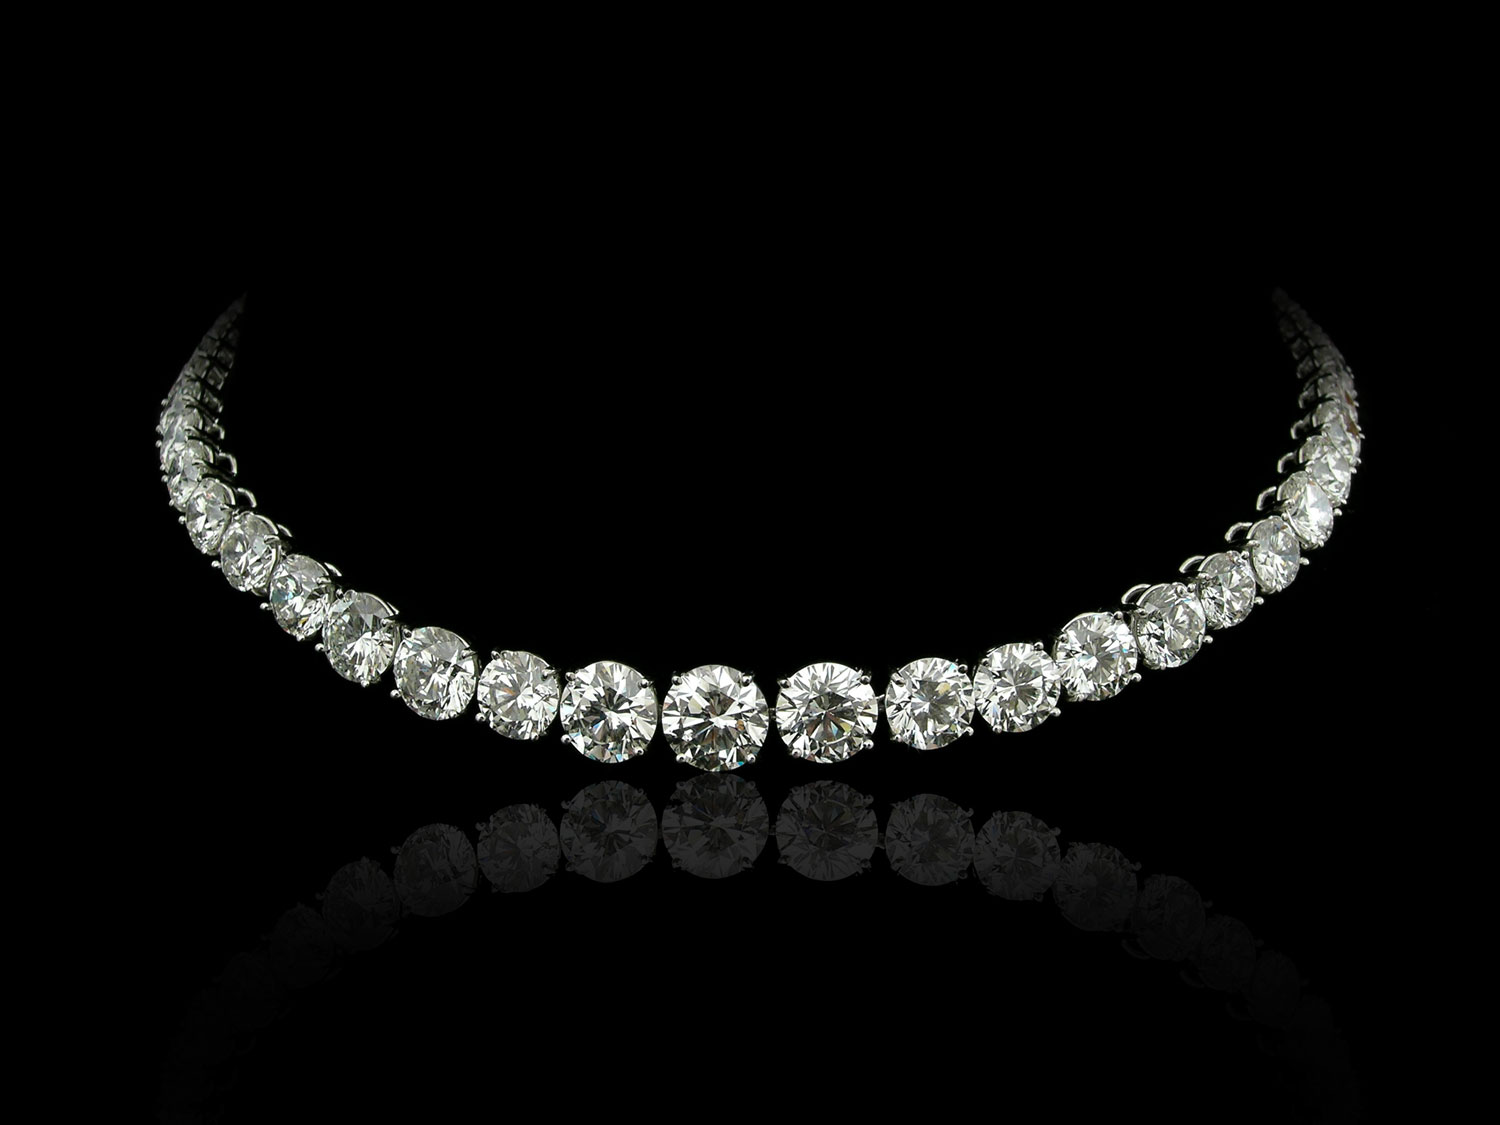 picture of a diamond necklace on a black background